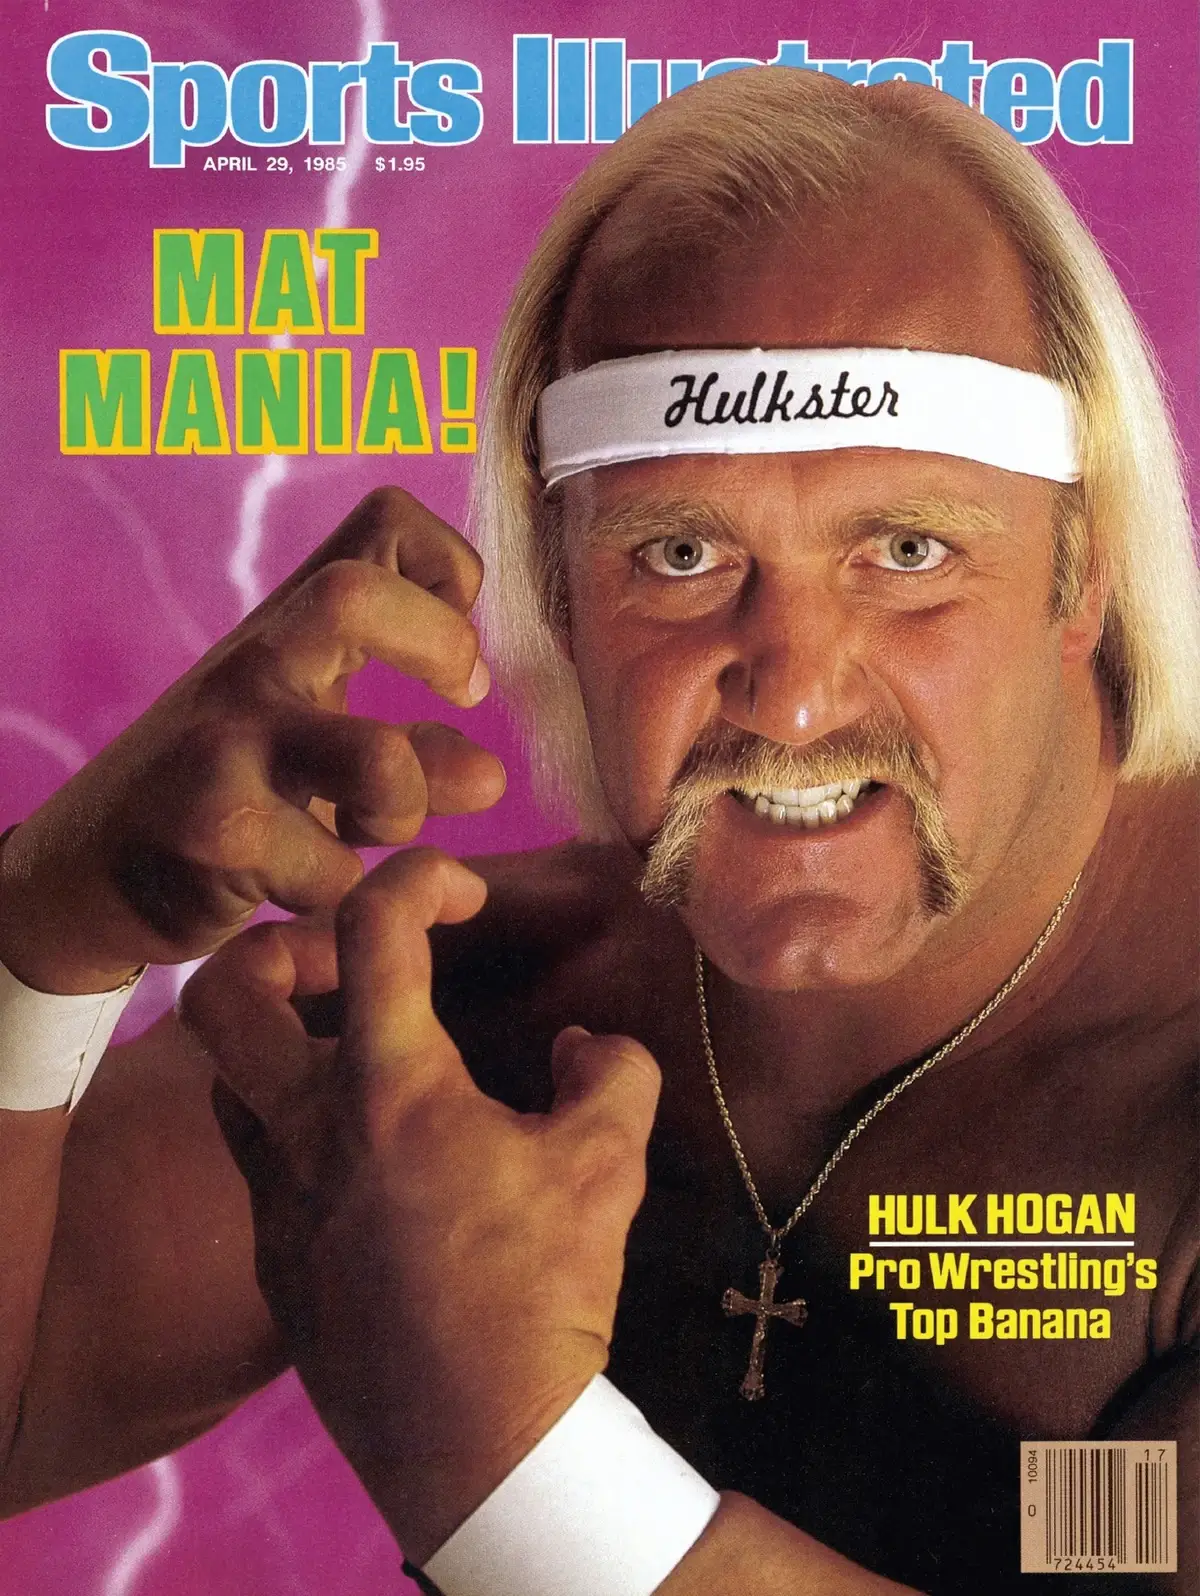 The April 1985 Sports Illustrated cover featuring Hulk Hogan